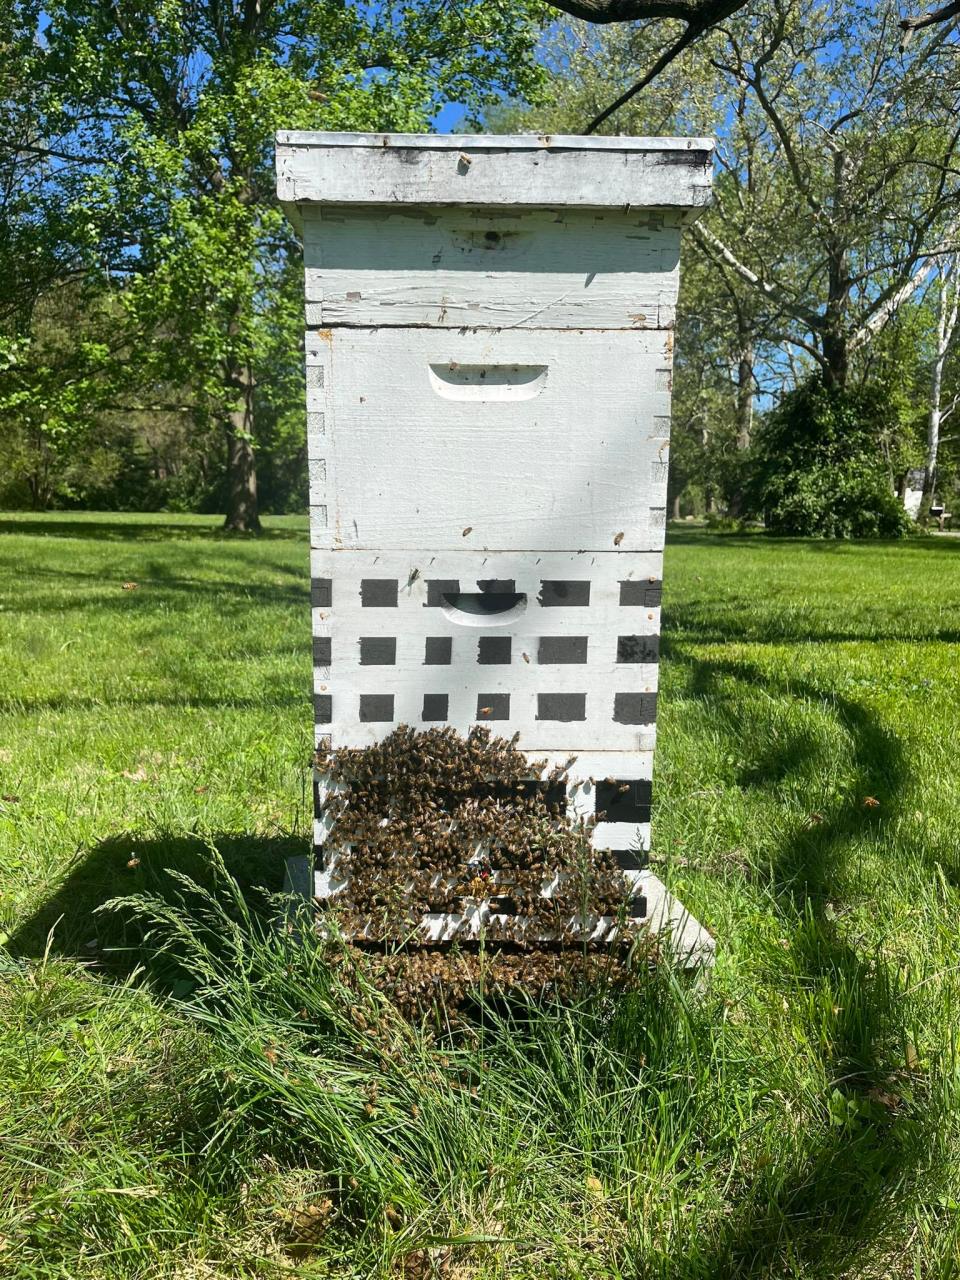 Bees that visited the Indianapolis Motor Speedway during the 2023 Indy 500 were transferred to a beekeeper's hive. The queen is still alive, and her hive is thriving. (Ross Harding / Courtesy photo)